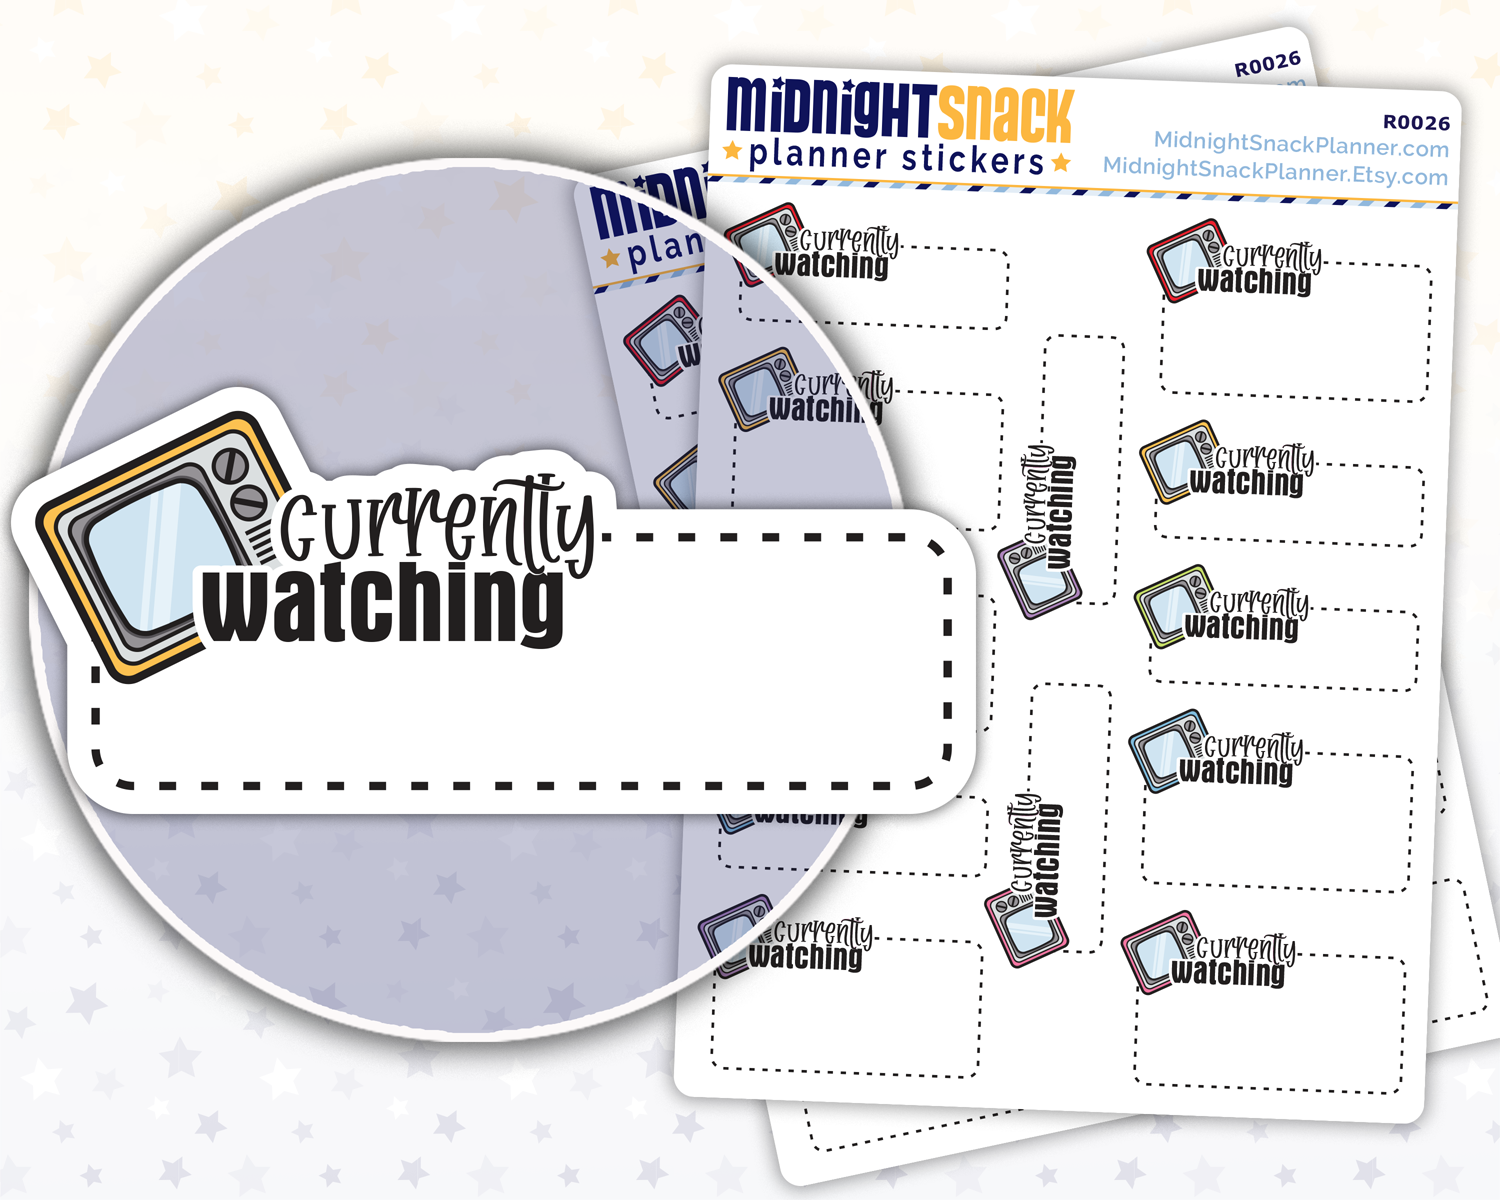 Currently Watching: TV and Movie Planner Stickers